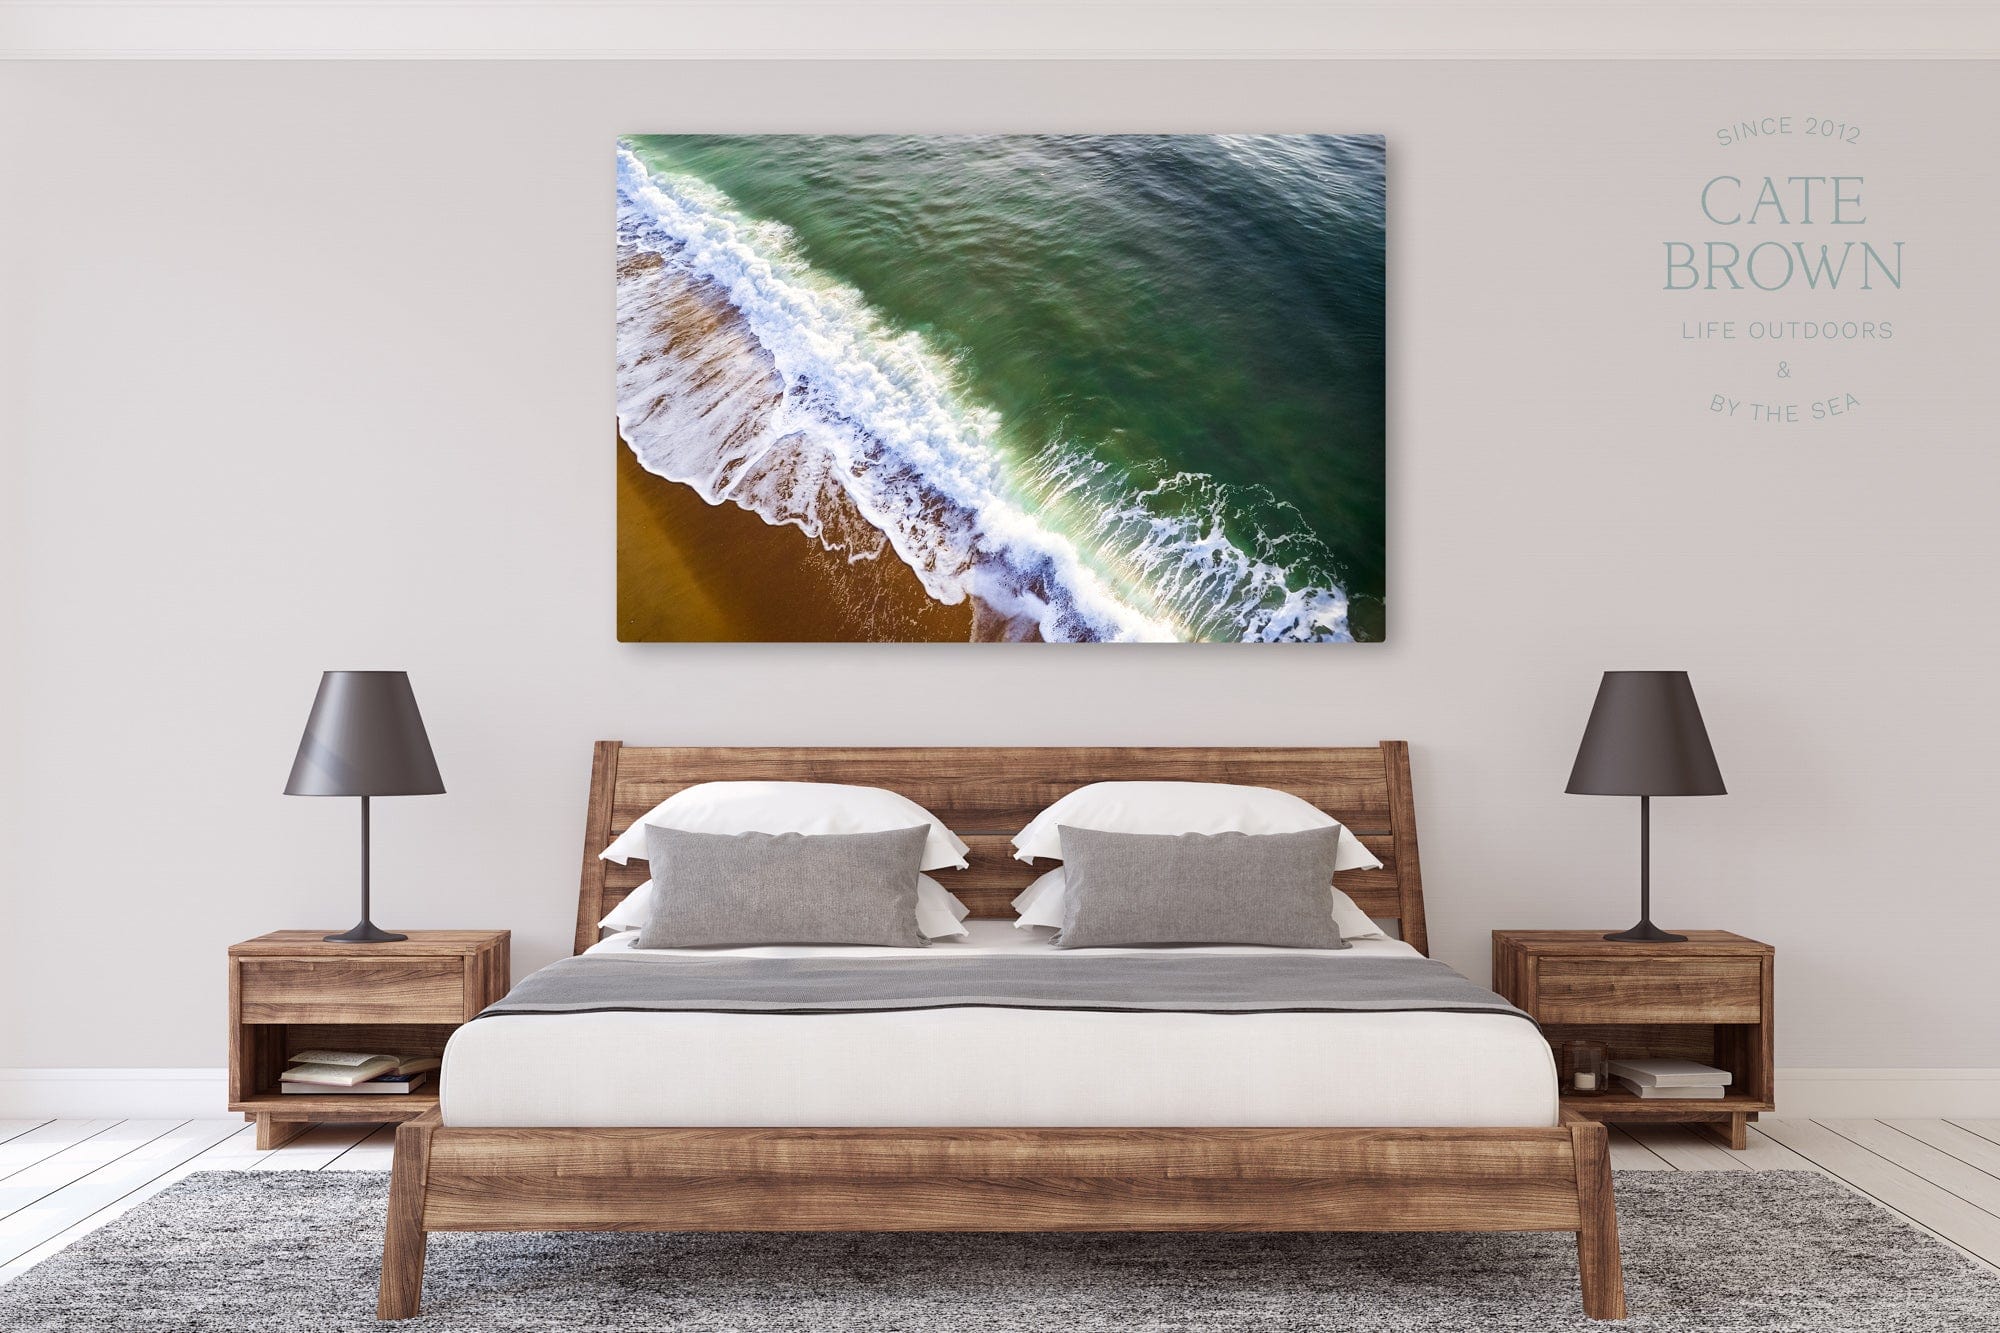 Cate Brown Photo Canvas / 16"x24" / None (Print Only) East Beach #12  //  Aerial Photography Made to Order Ocean Fine Art